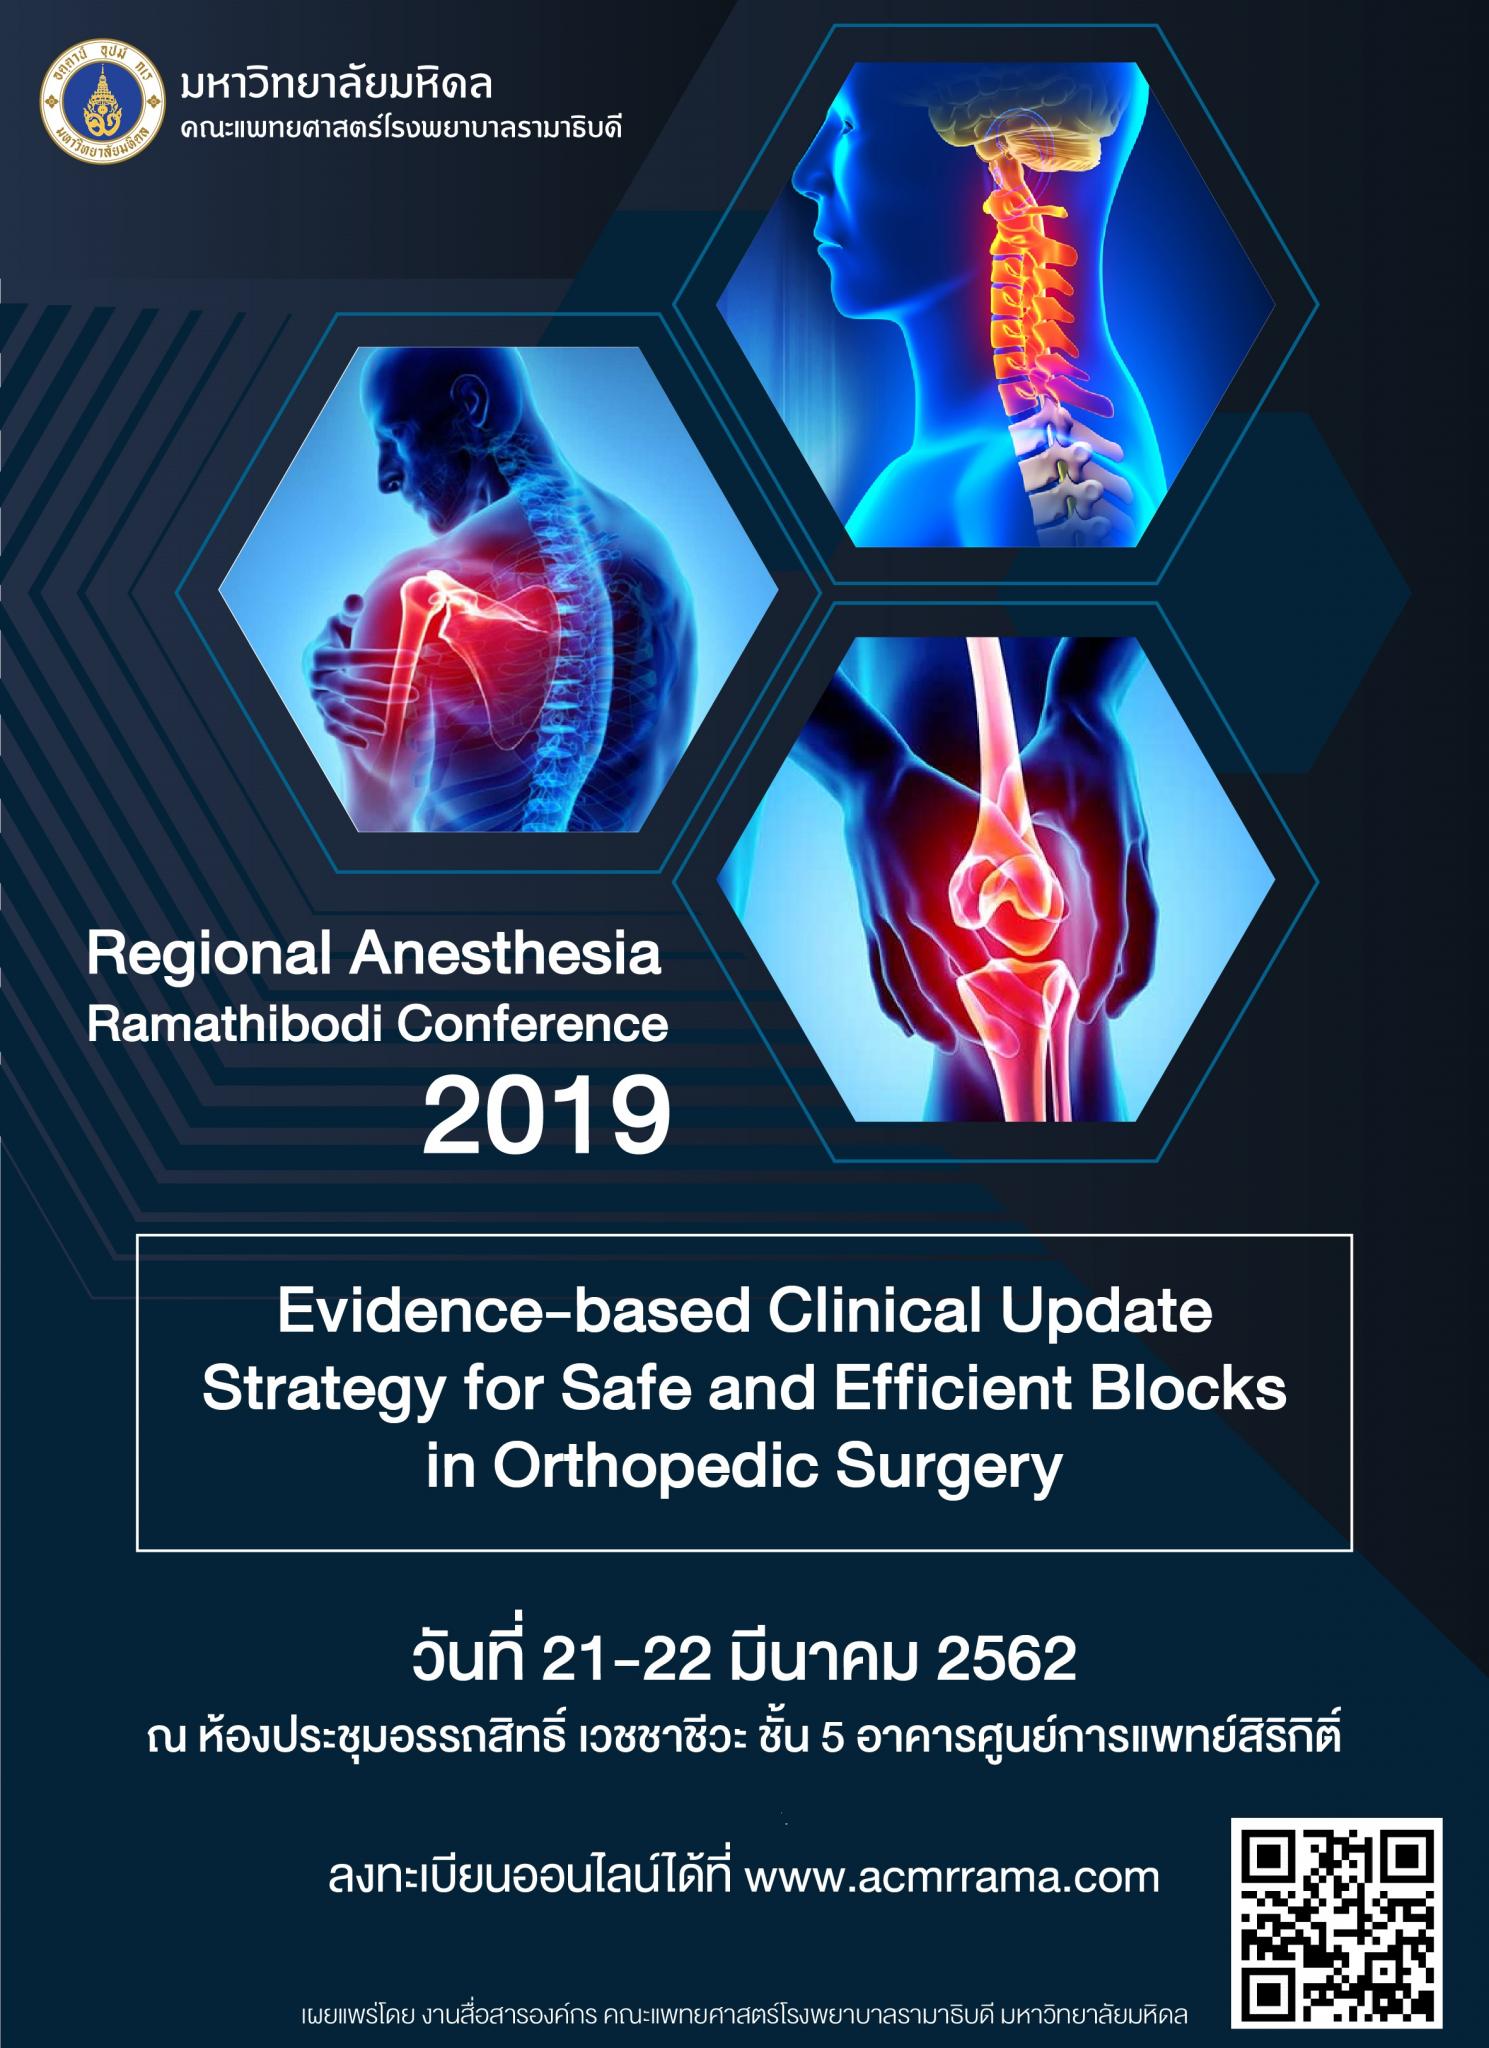 Regional Anesthesia Ramathibodi Conference 2019 Evidence-based Clinical Update Strategy for Safe and Efficient Blocks in Orthopedic Surgery